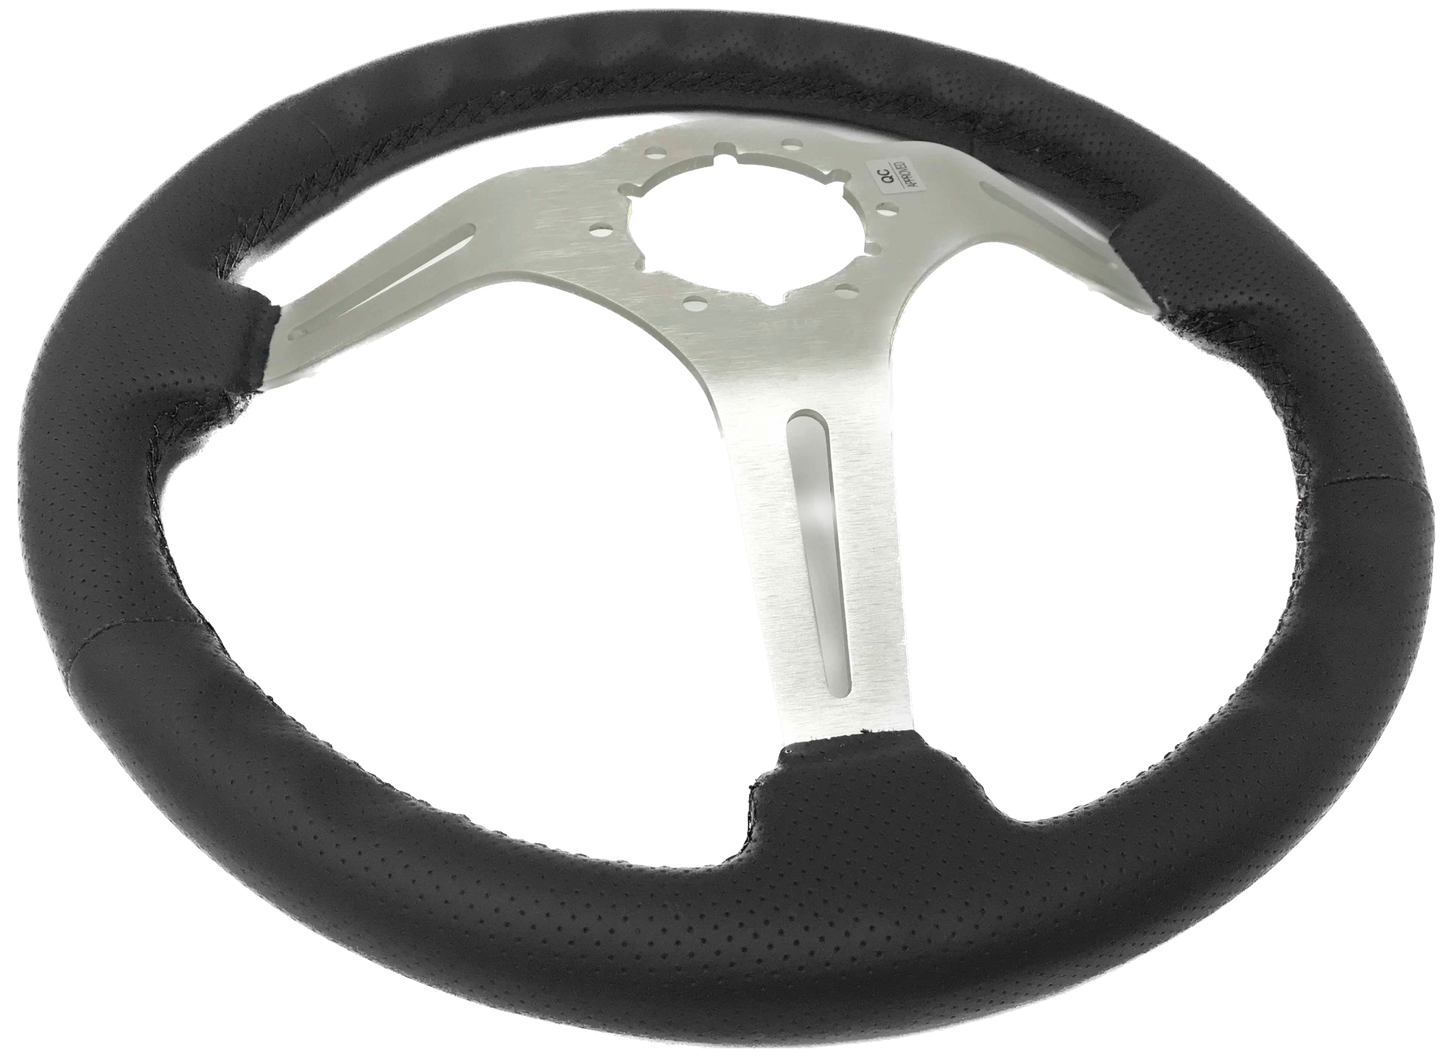 1969-85 Impala Steering Wheel Kit | Perforated Leather | ST3587BLK-BLK